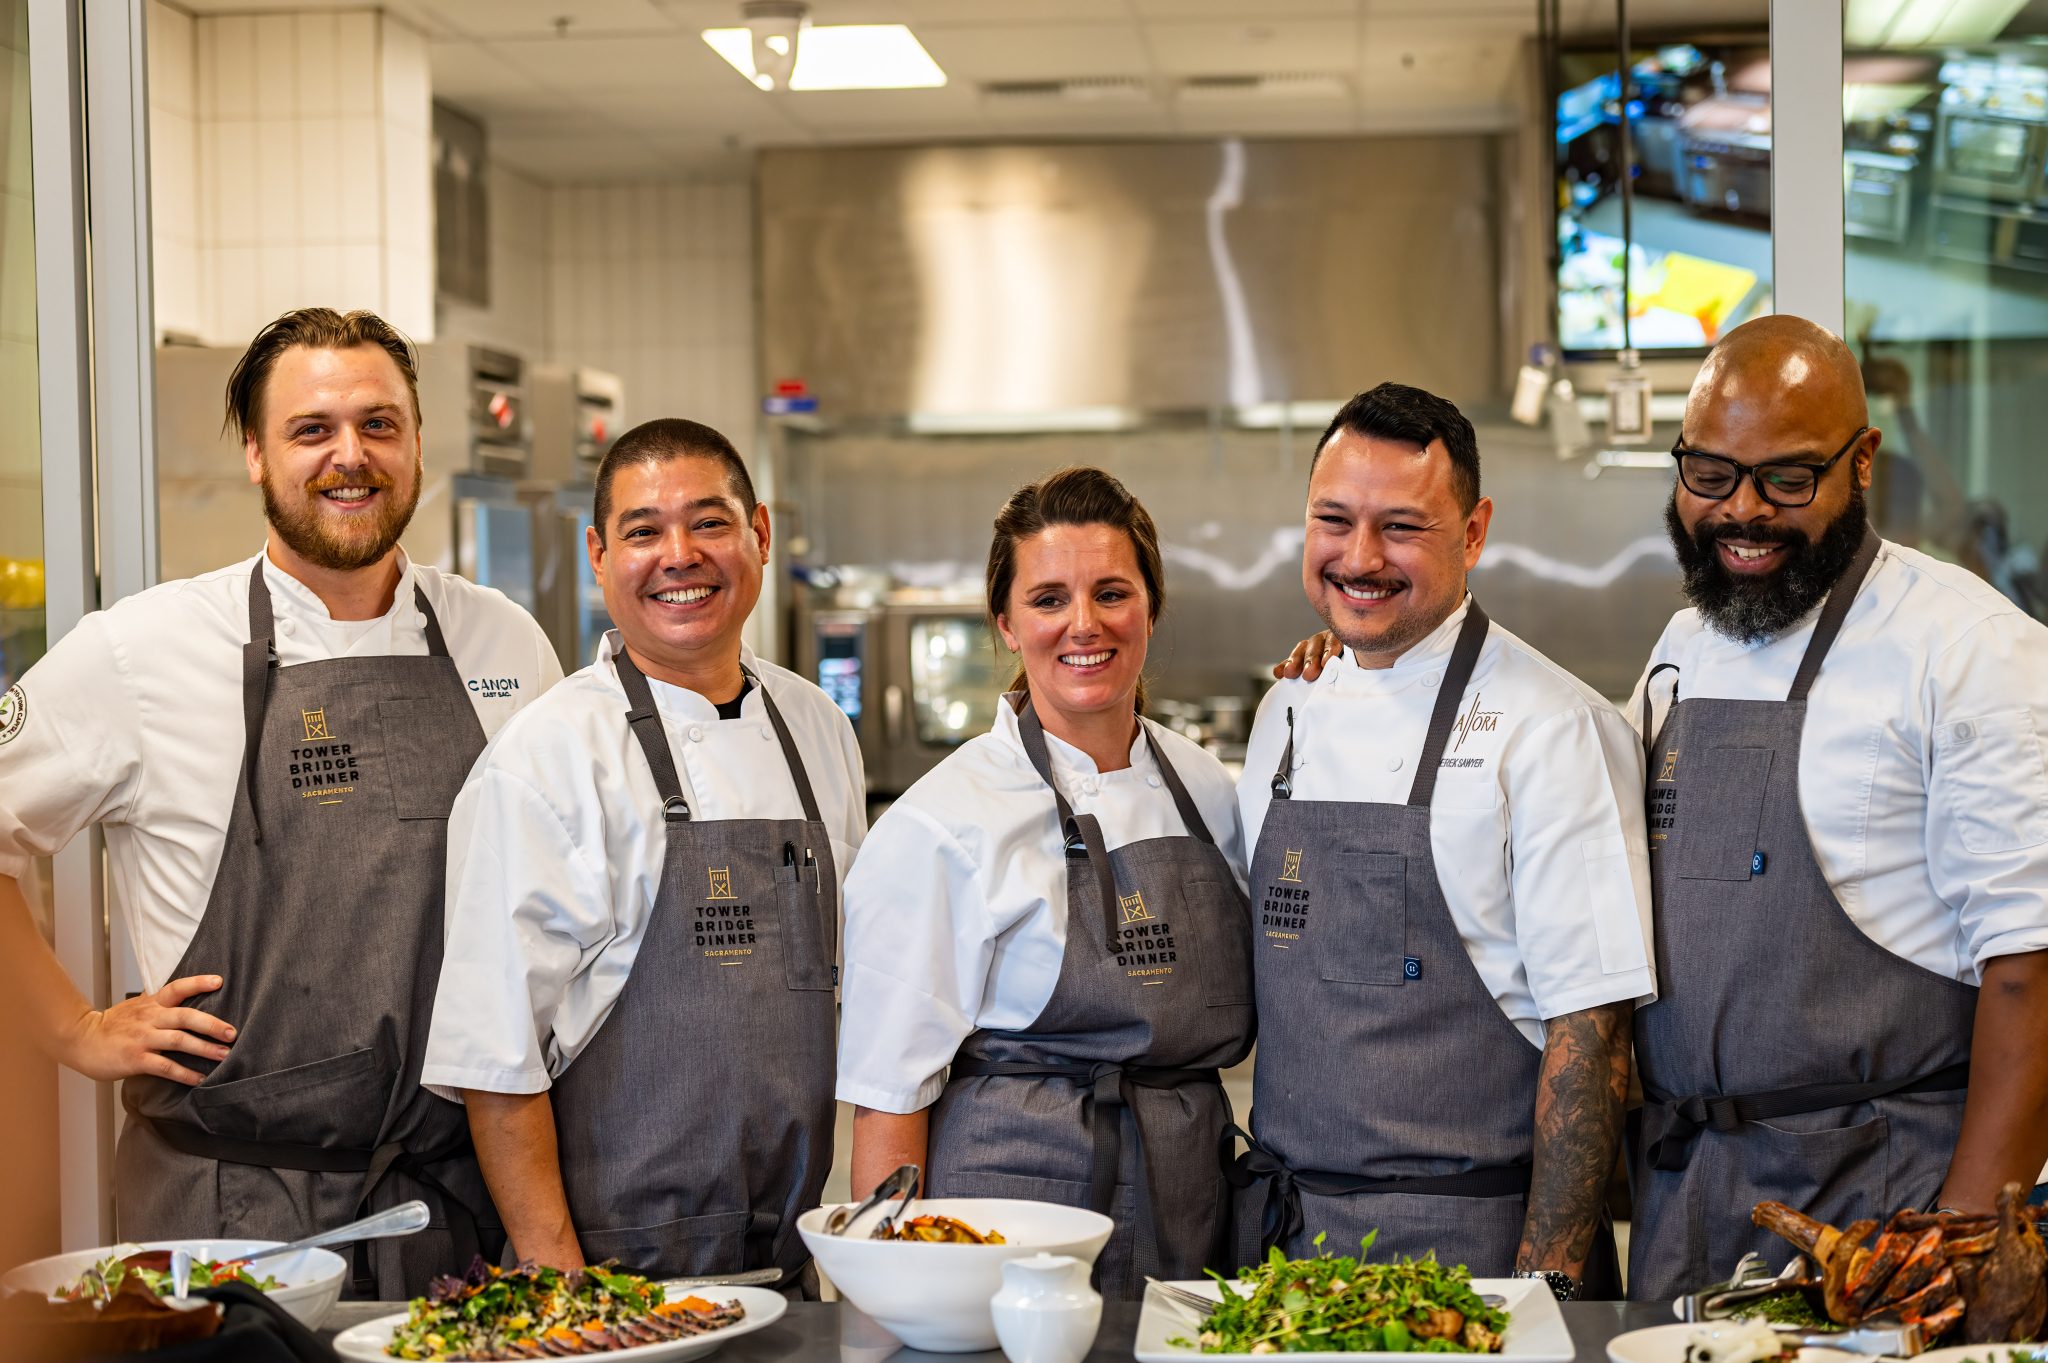 Sean Rummery, Craig Takehara, Rebecca Campbell, Derek Sawyer, Dennis Sydnor, group, friends, fun, smiling, group, posed, Farm to fork festival, sacramento, california, gourmet food, chefs, men and woman, people of color, uniforms, friends, fun, happy, cooks, preview dinner